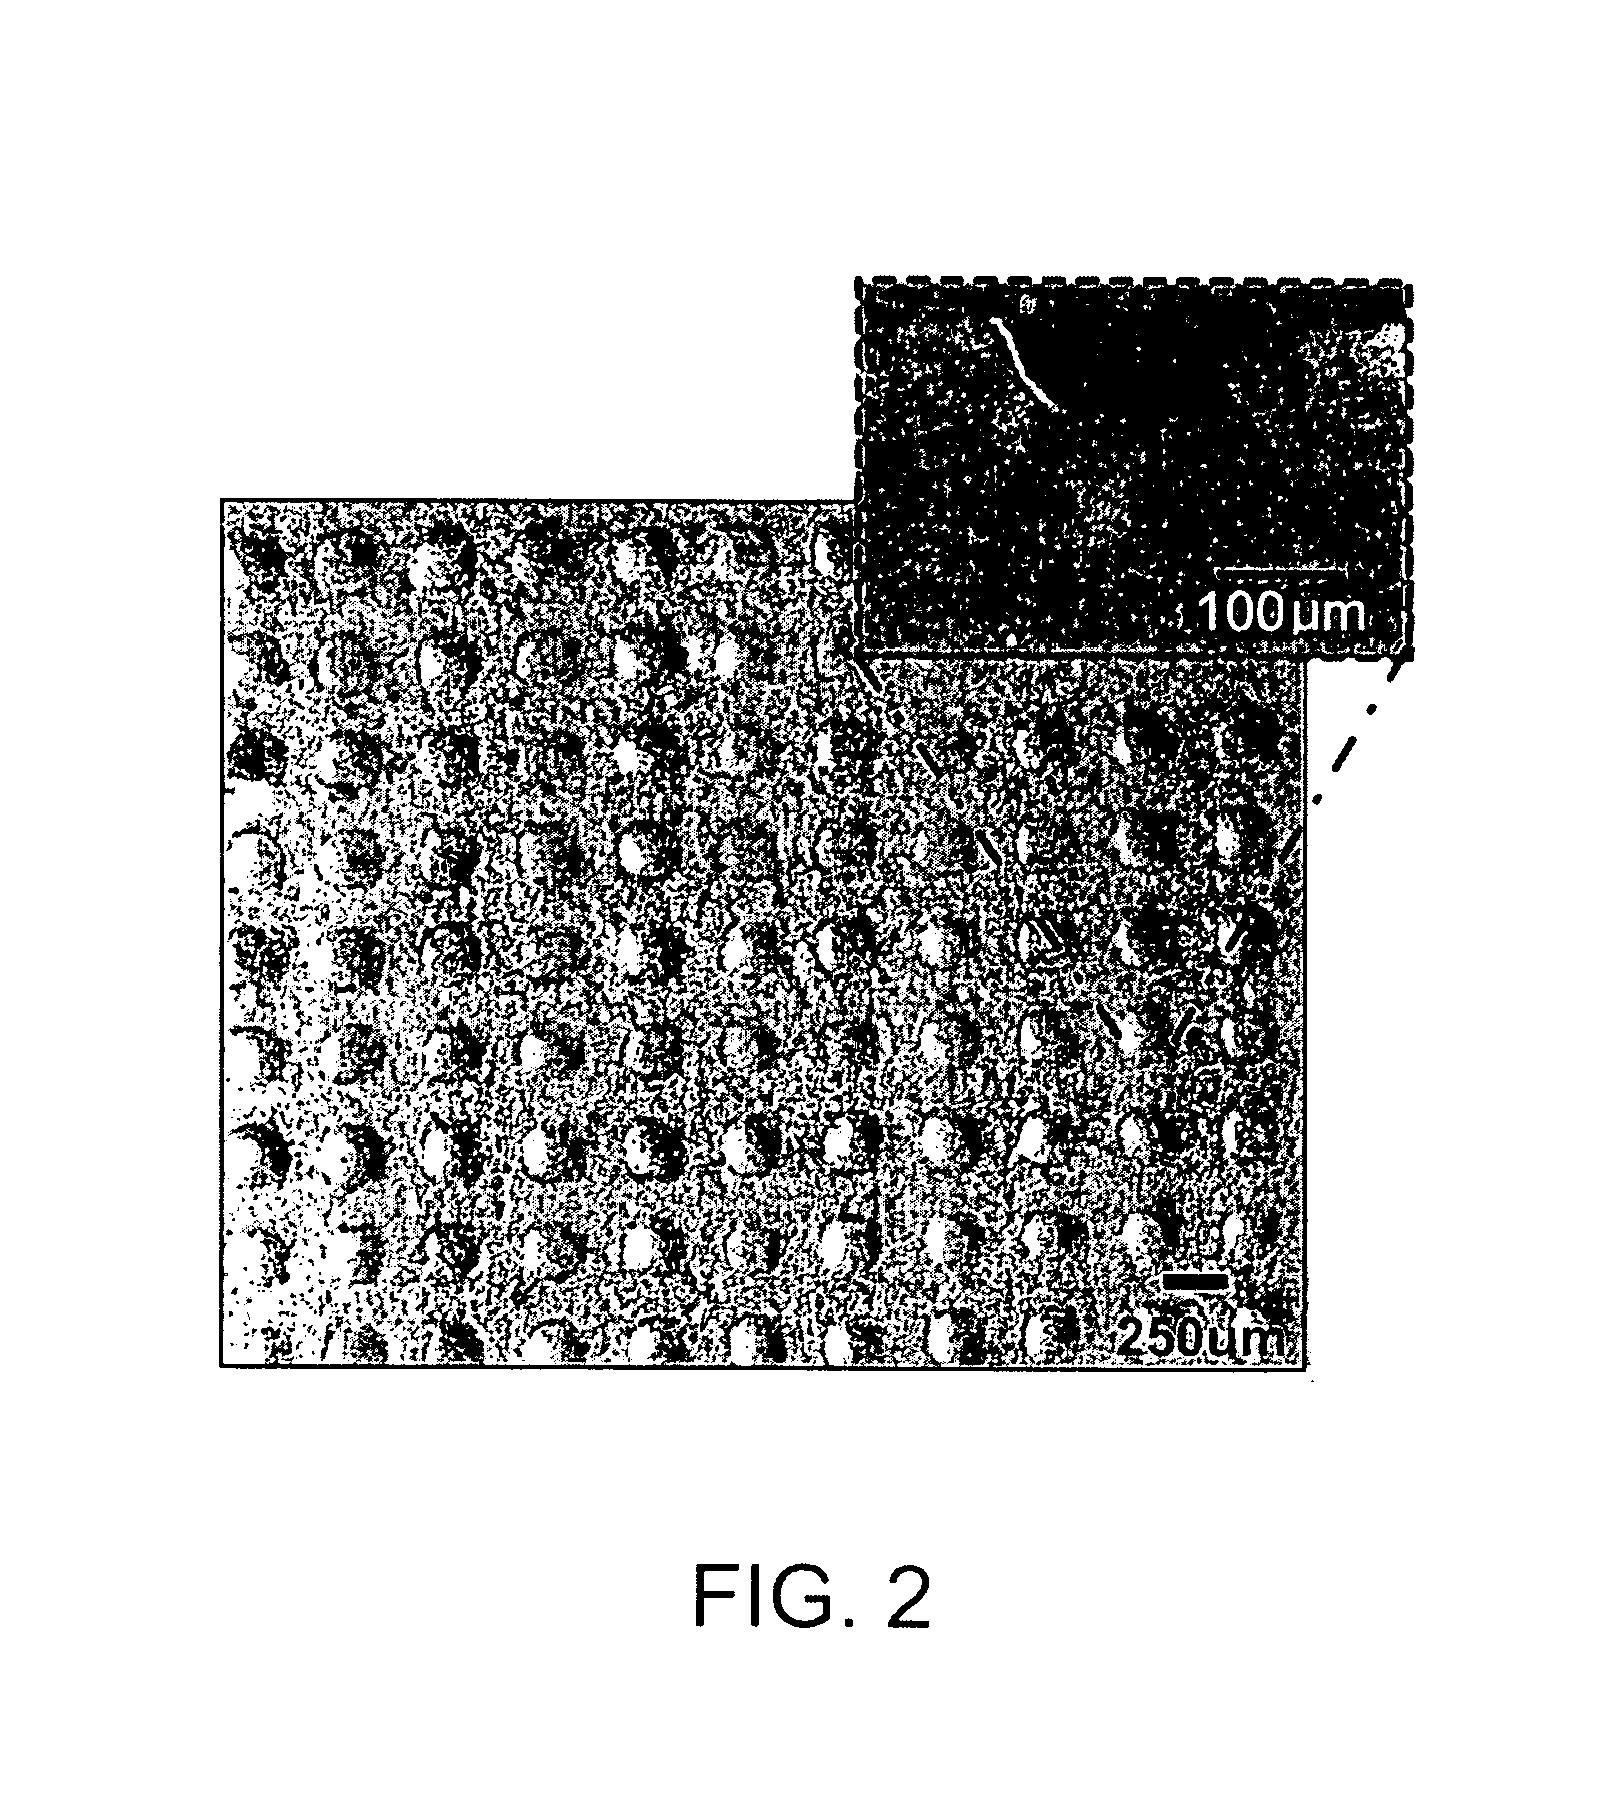 Apparatus and method for culturing stem cells